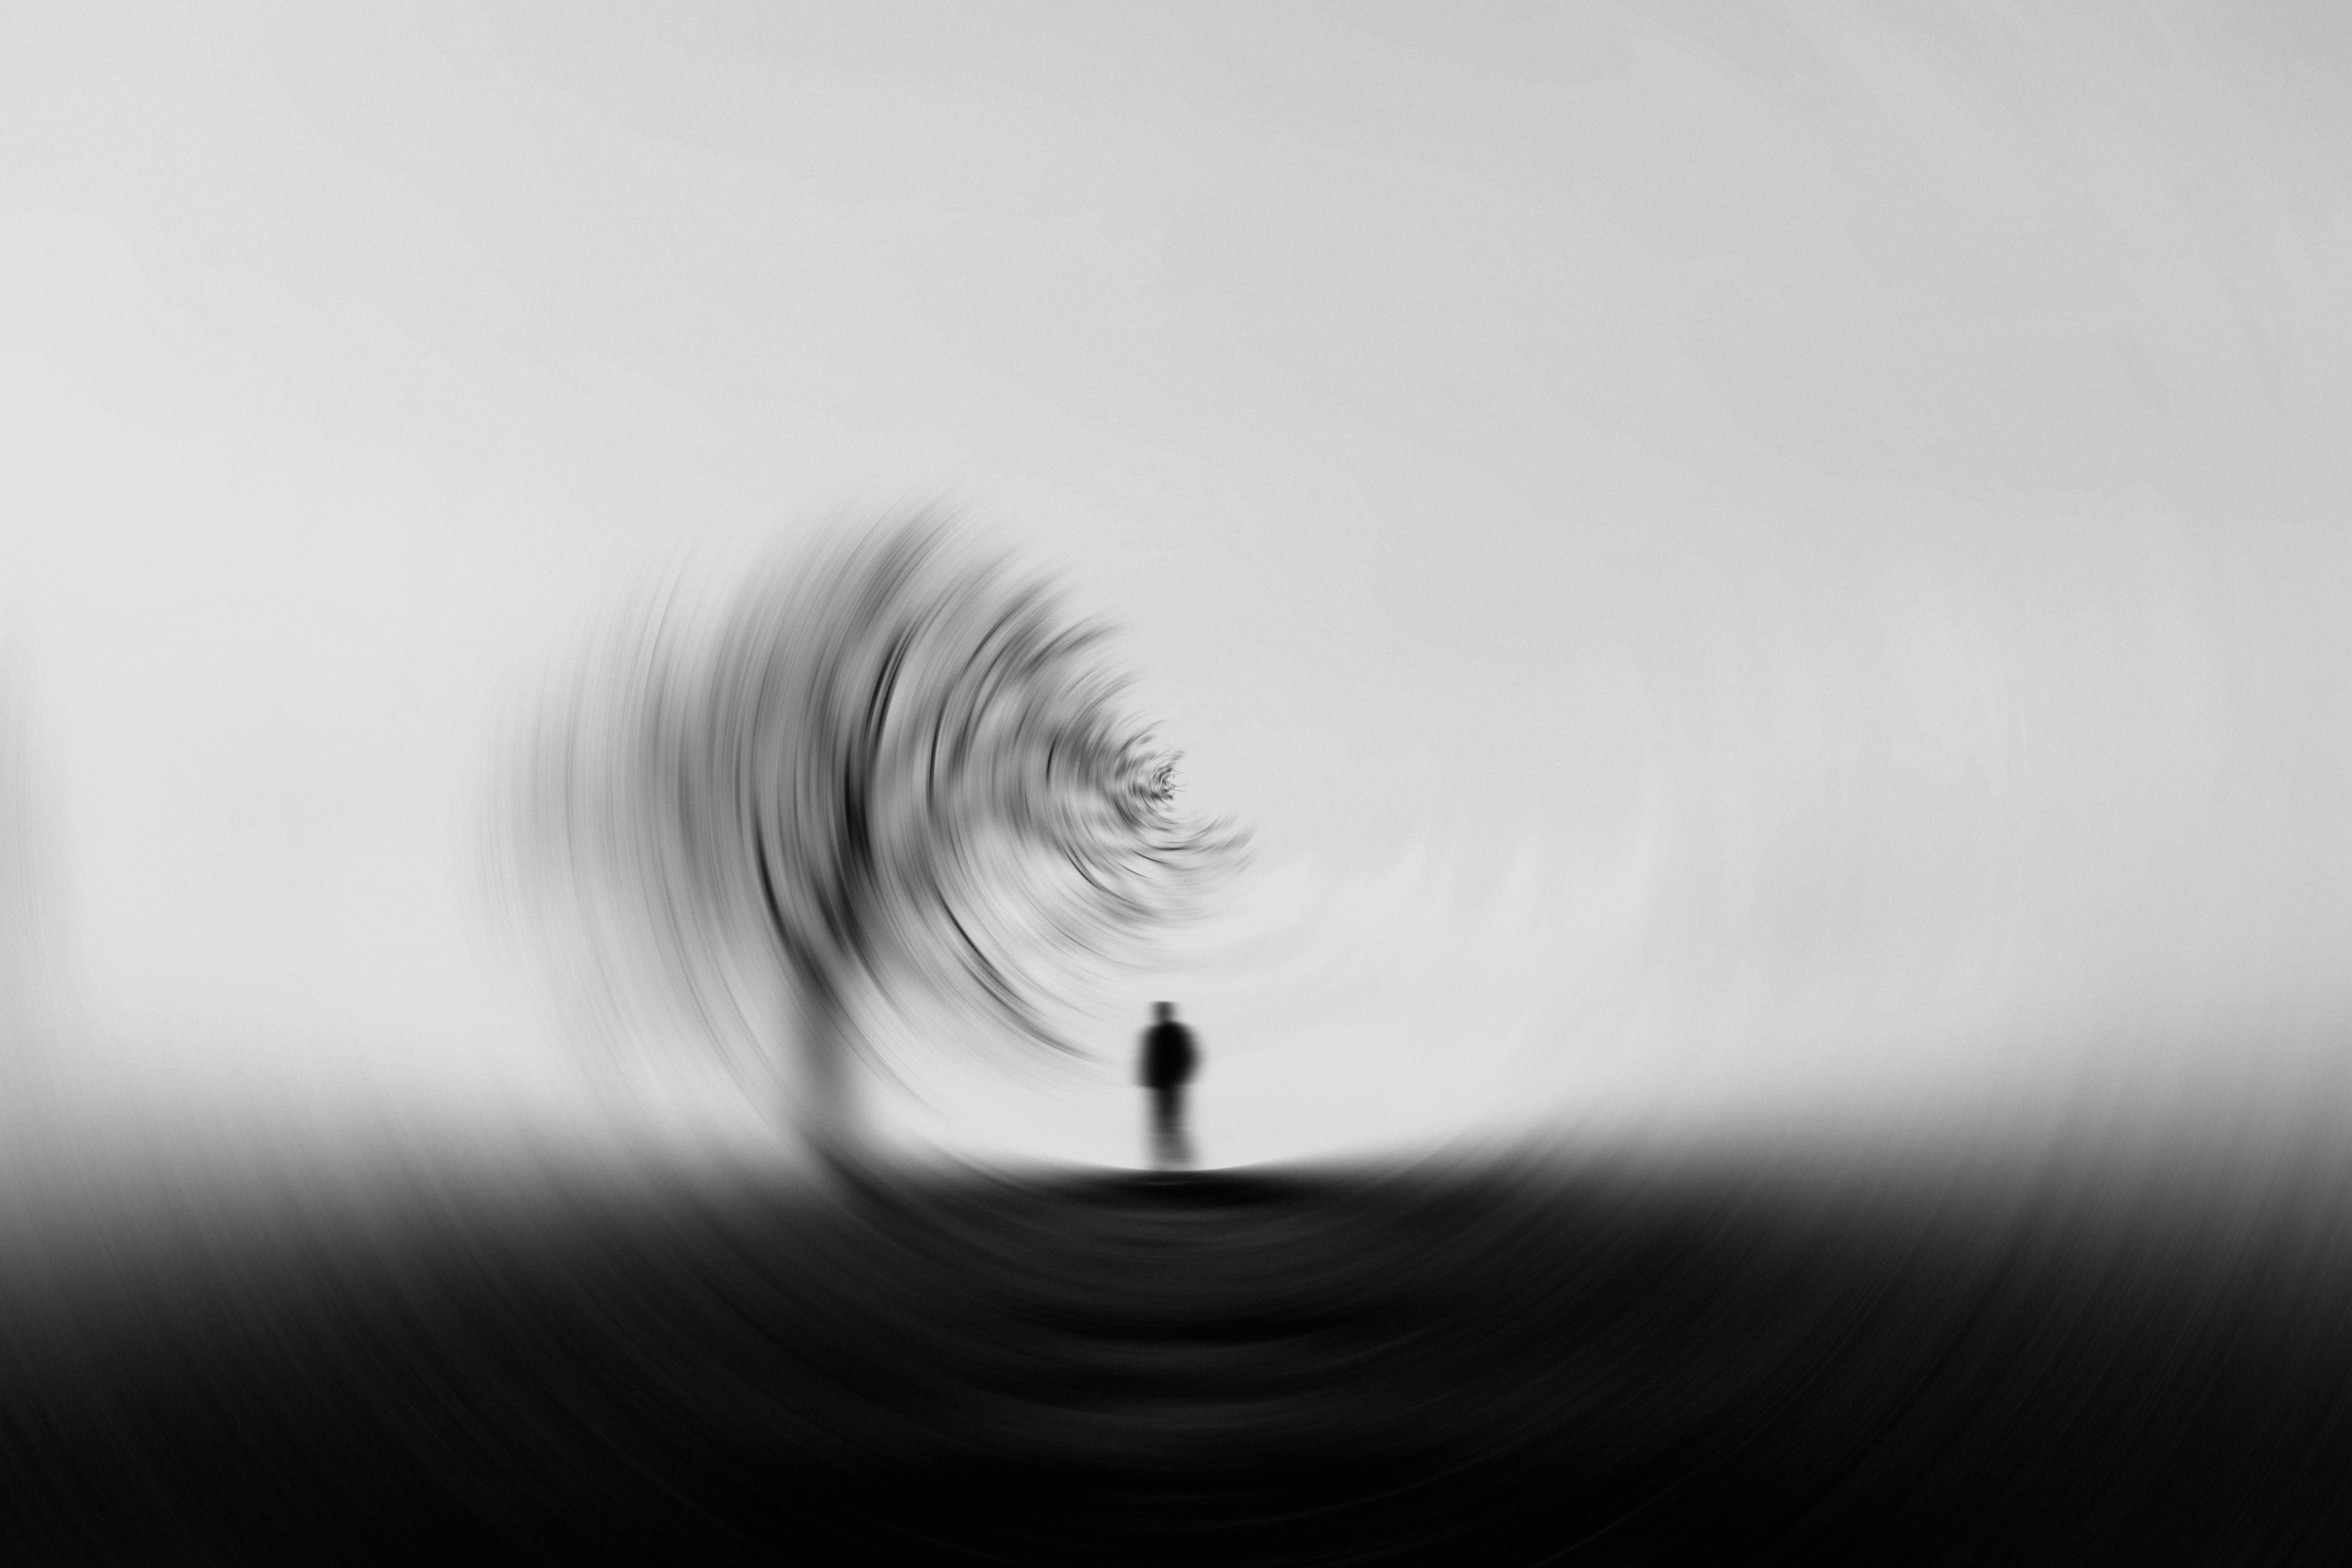 effect, chb, bw, silhouette, smooth, blur, miscellanea, miscellaneous, wood, tree